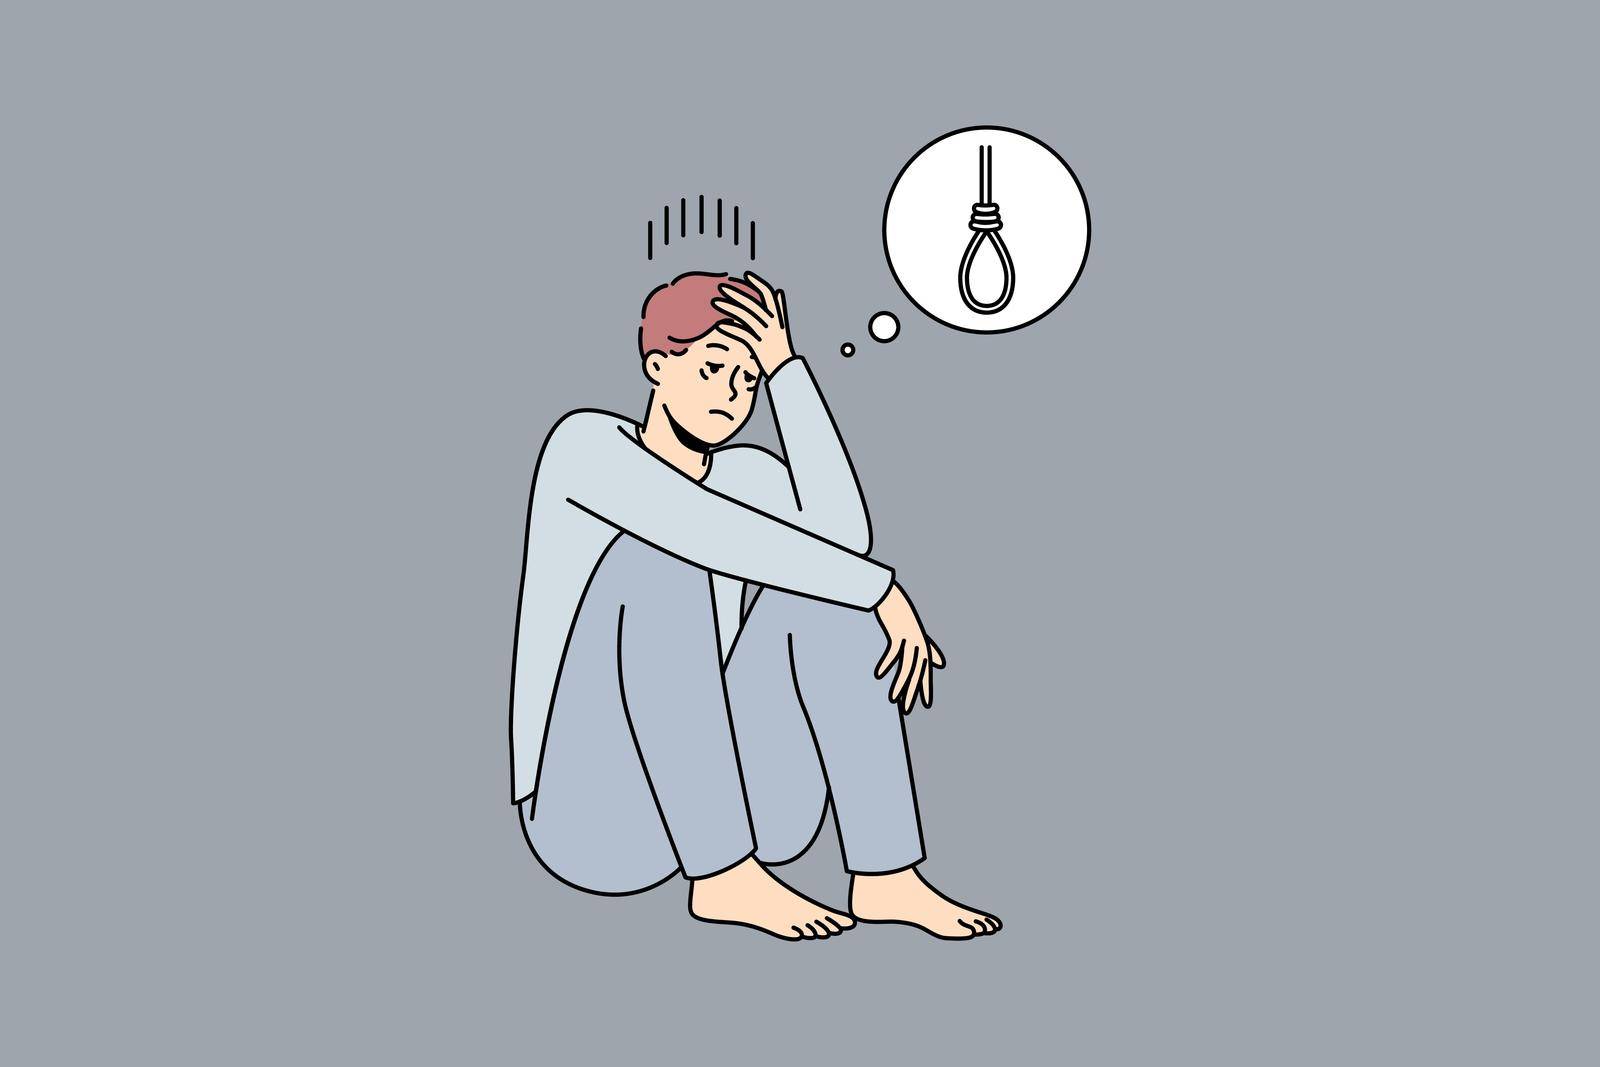 Depressed young man thinking of suicide. Unwell sad male feel depression suffer from mental problems want to end life. Vector illustration.